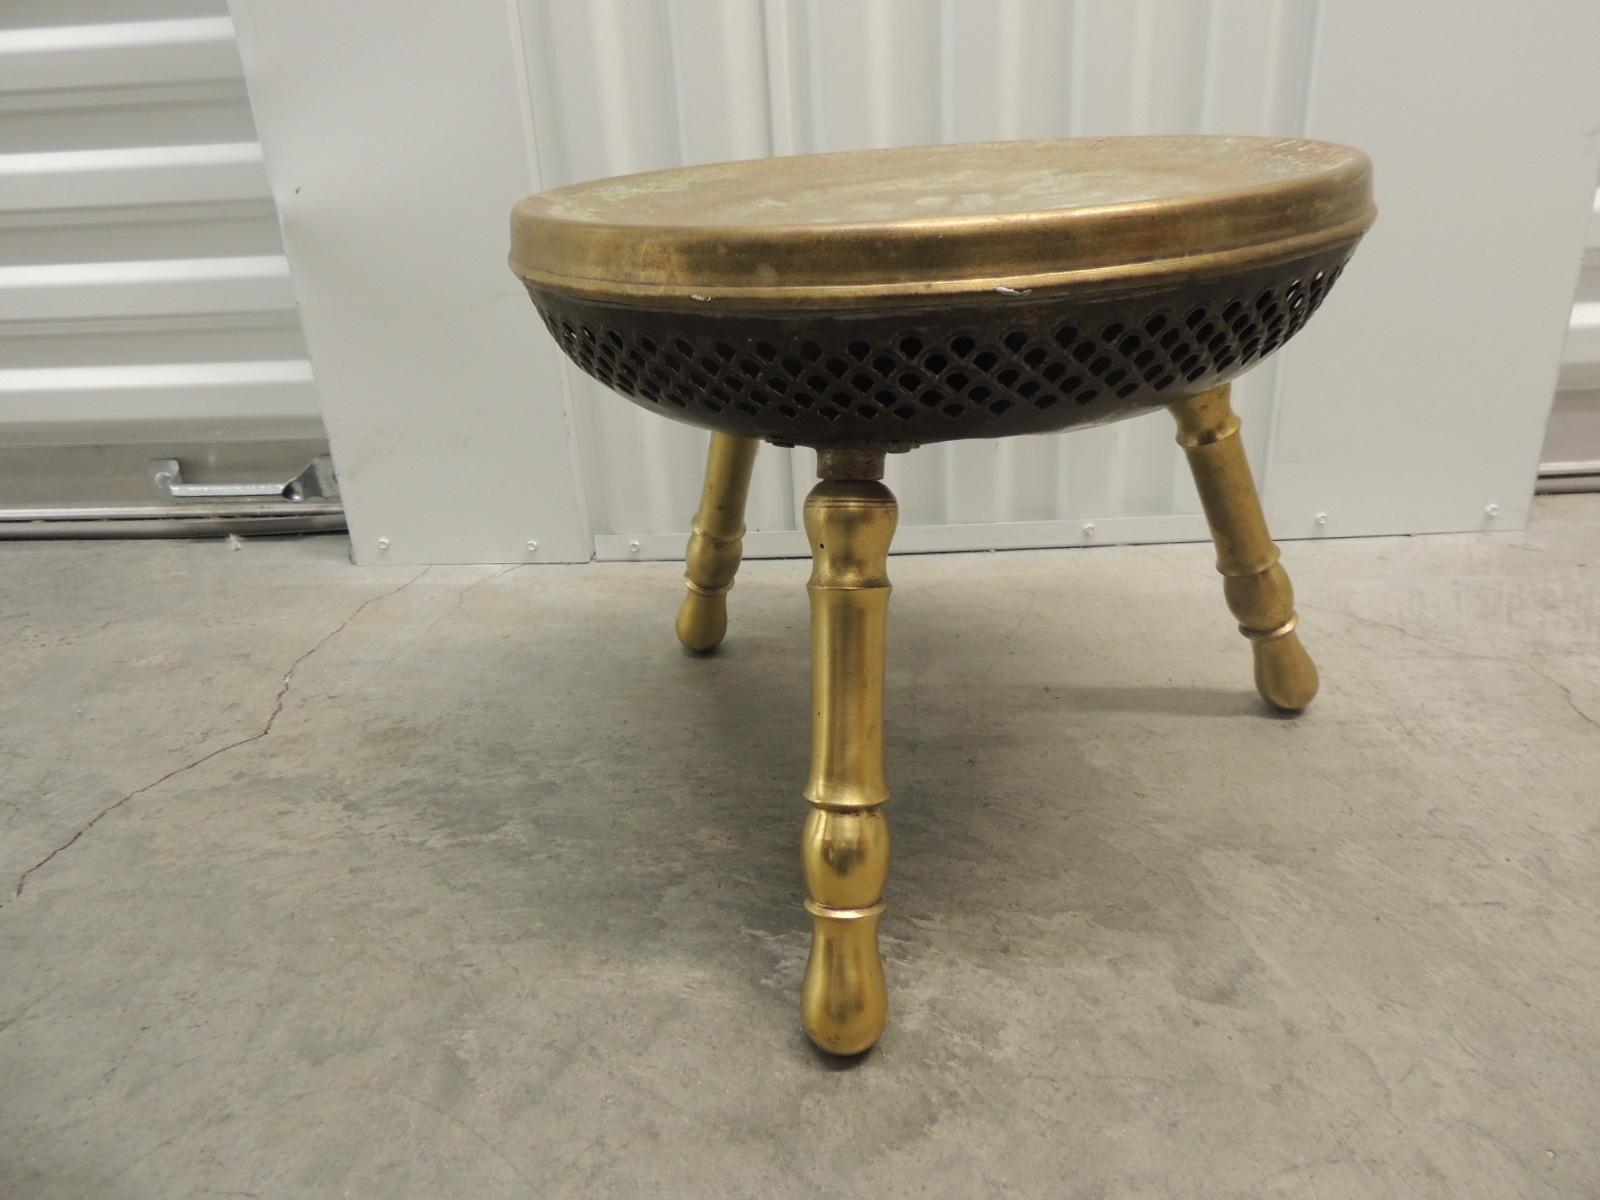 Vintage round brass Indian stool with tripod legs.
The legs unscrew from the top. Reposse style top.
Size: 14 x 12